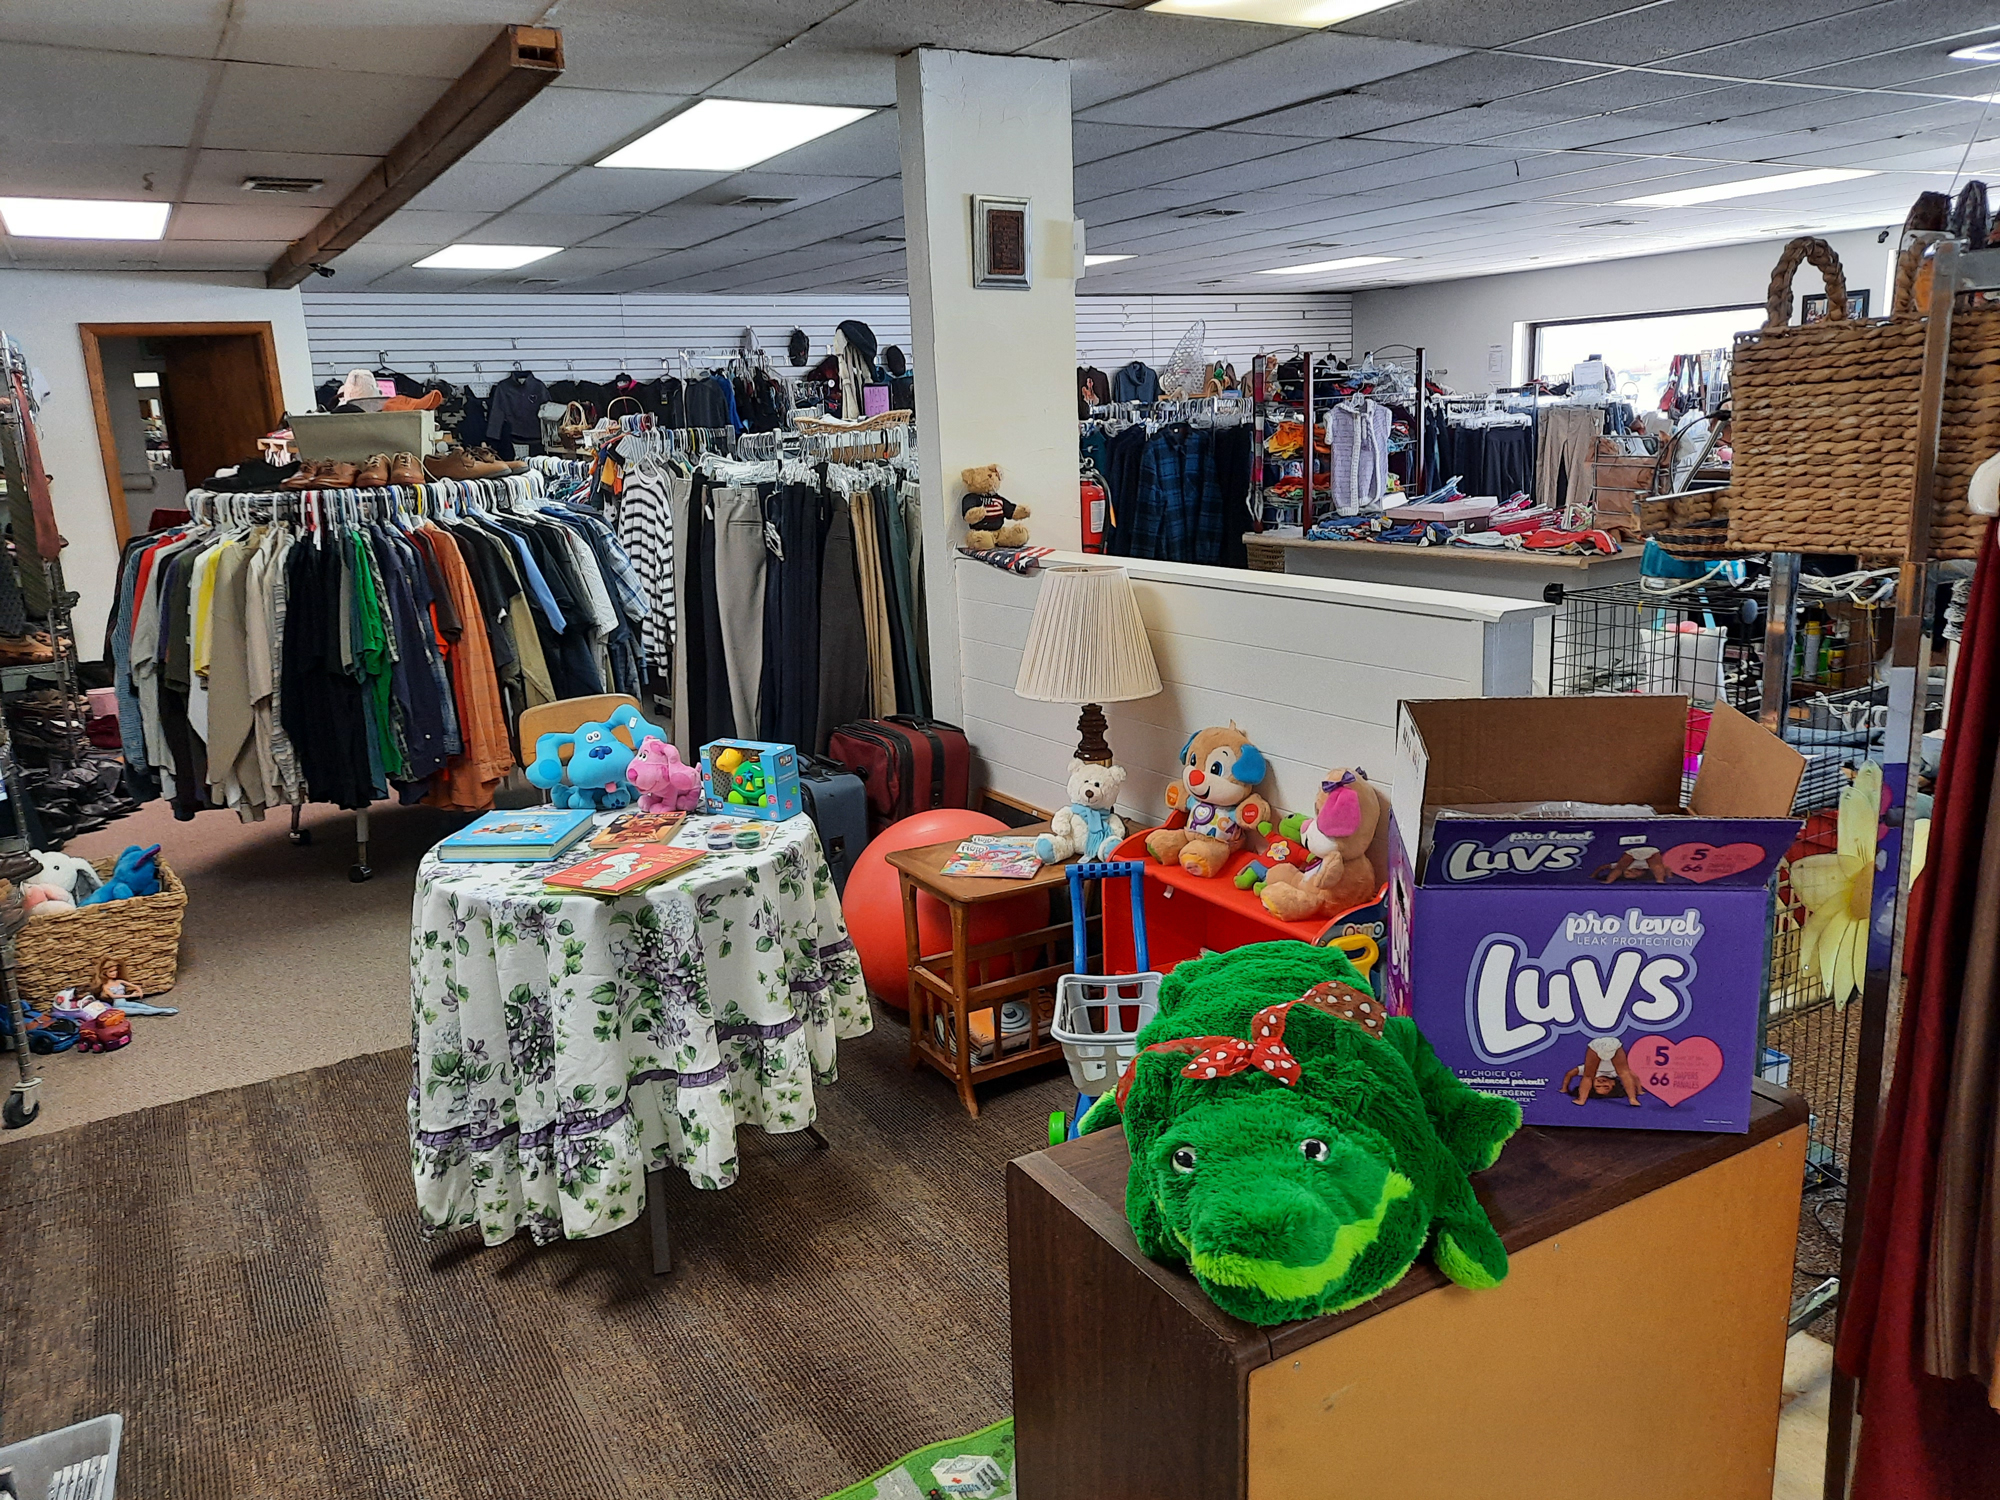 New Vision Thrift Store sells clothing, household items, and more.